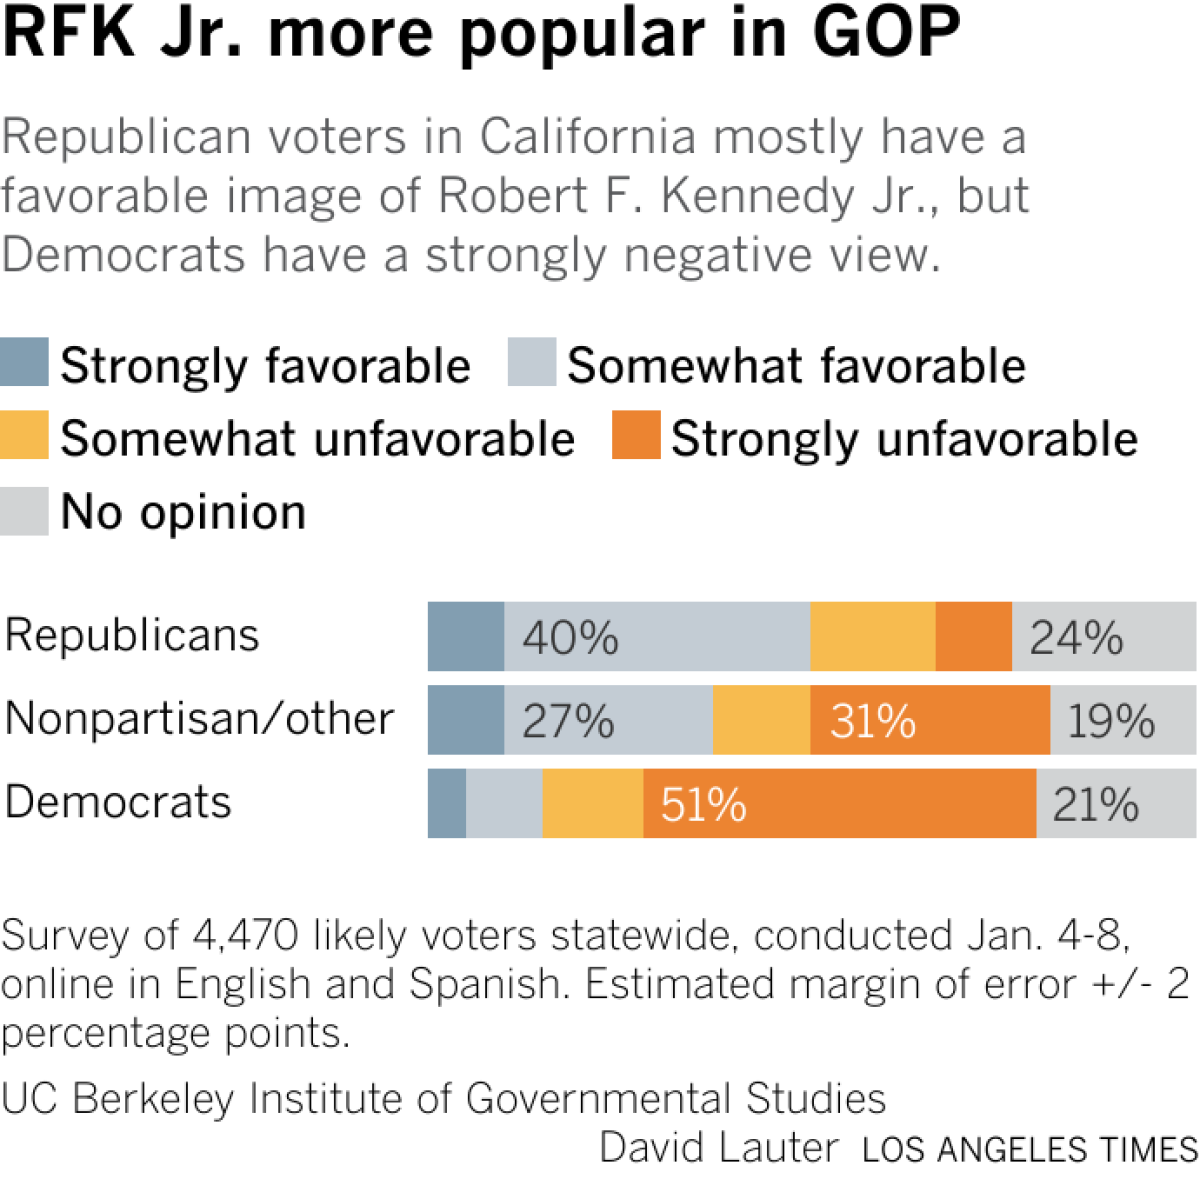 Republican voters in California mostly have a favorable image of Robert F. Kennedy Jr., but Democrats have a strongly negative view.